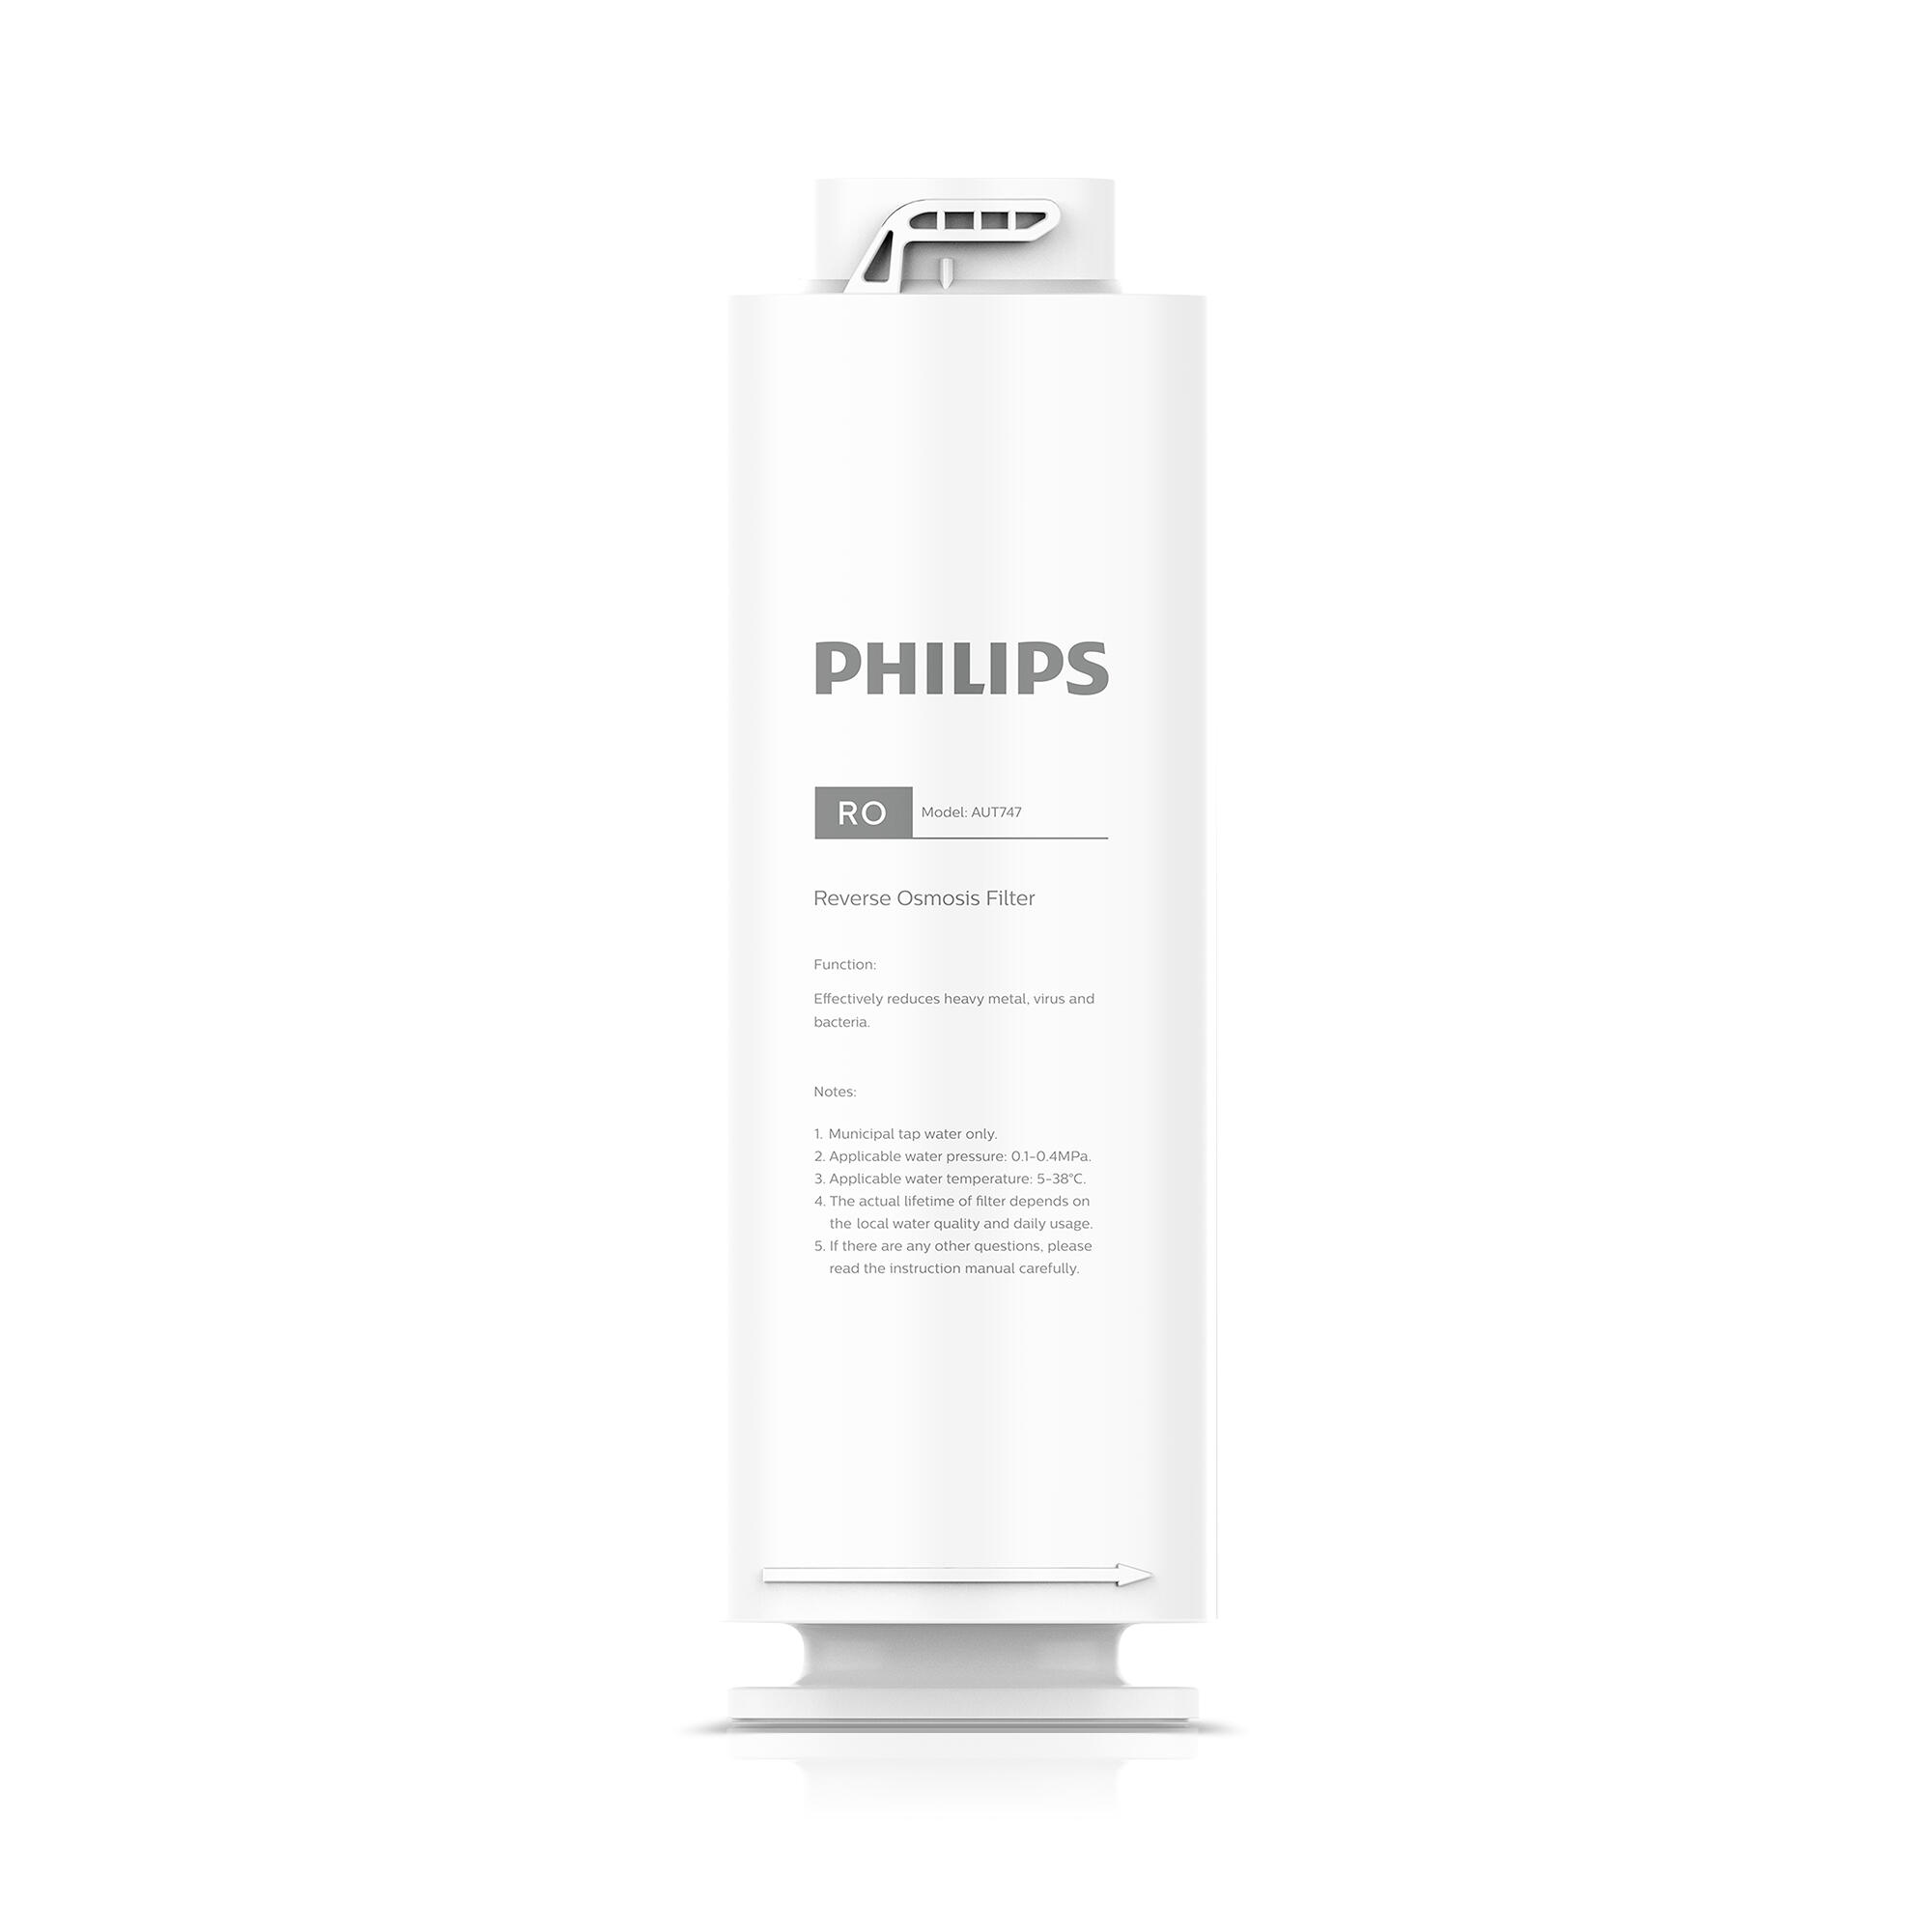 PHILIPS AUT7006 Reverse Osmosis Under Sink Water Filtration System User  Manual